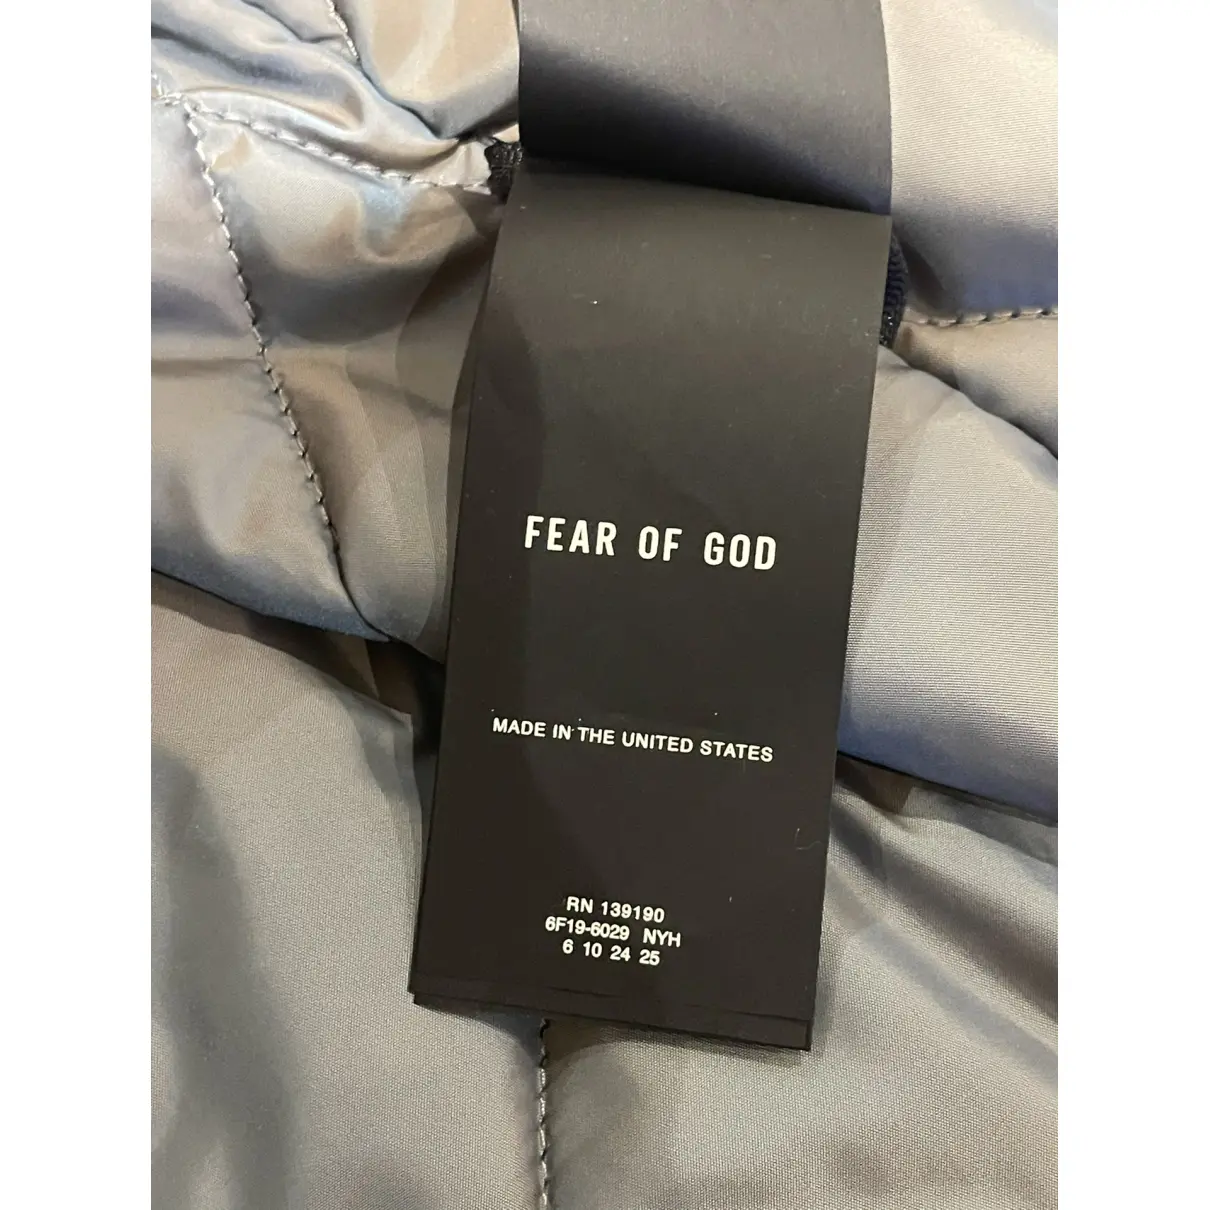 Buy Fear of God SixthCollection coat online